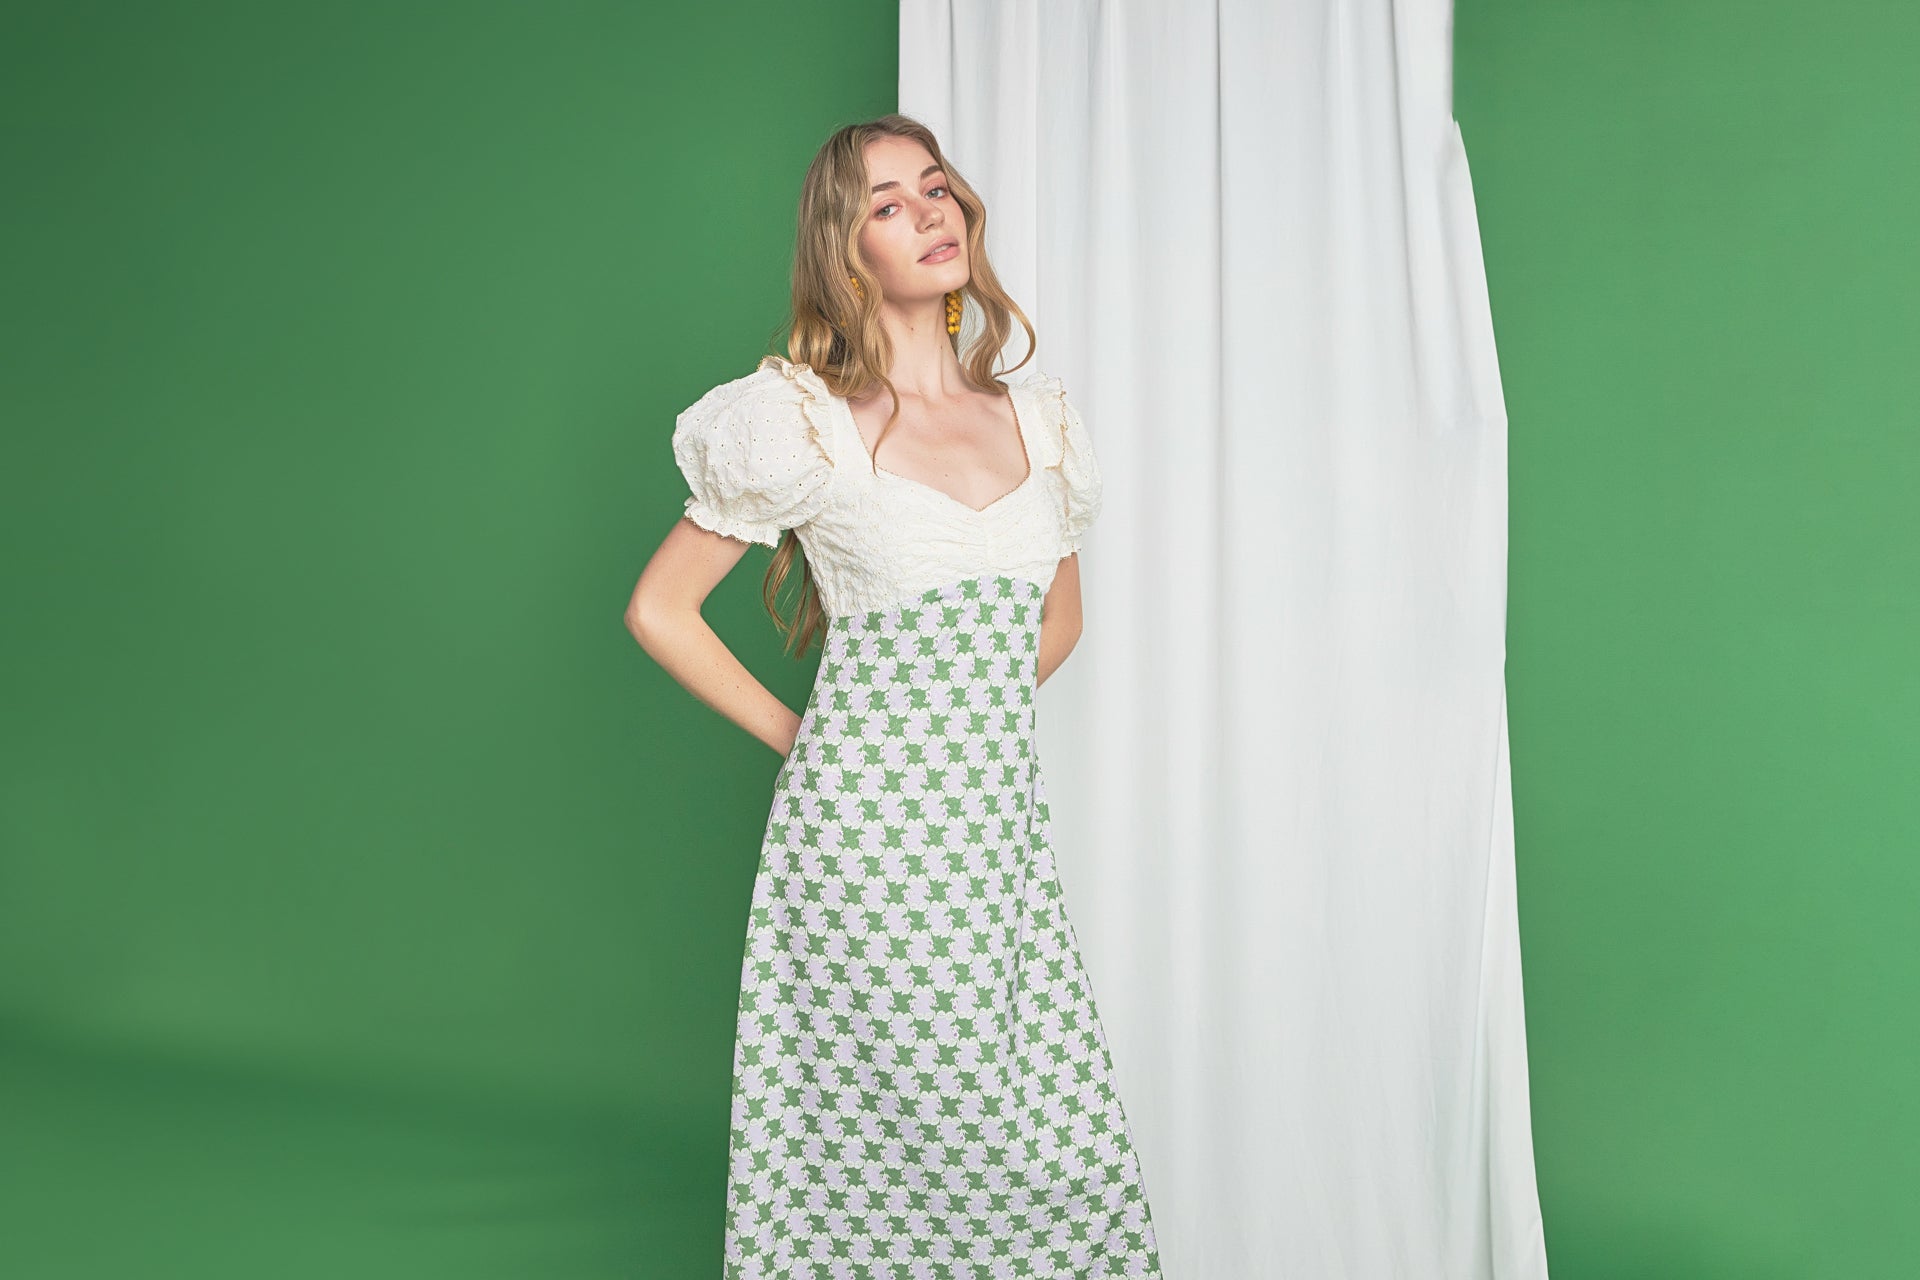 Floral Print Maxi Dress - Available from English Factory at shopenglishfactory.com